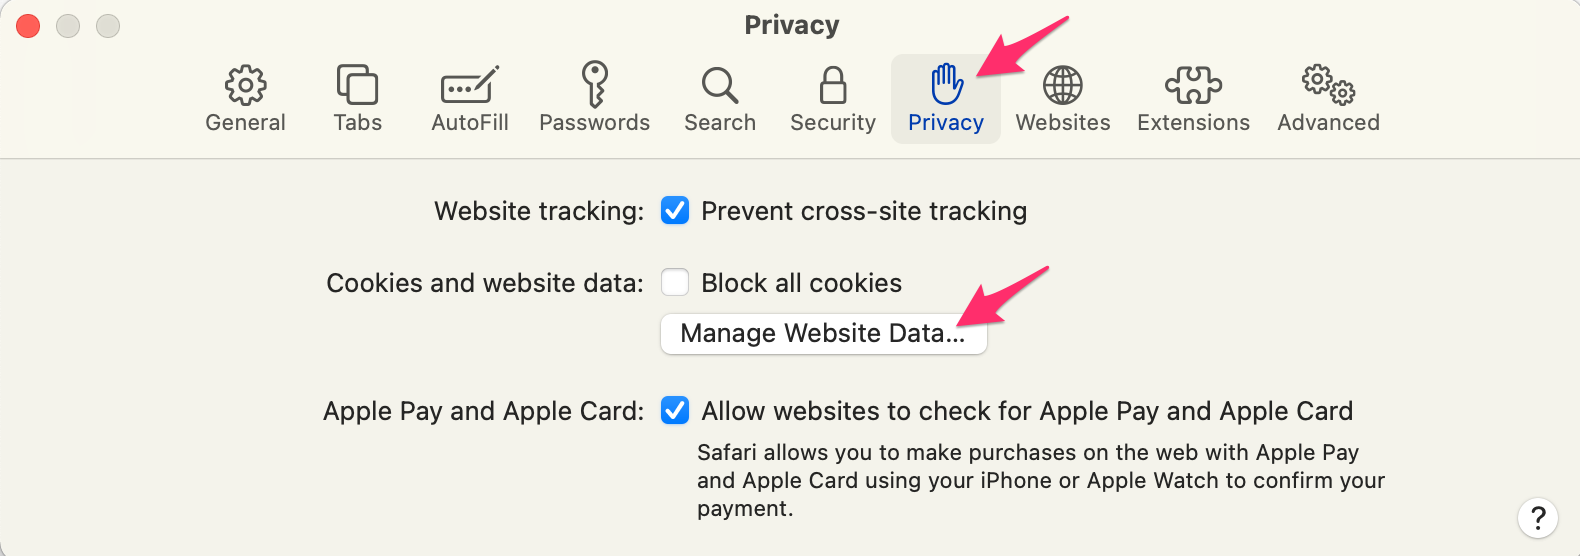 Open Privacy settings > Manage Website Data > Remove